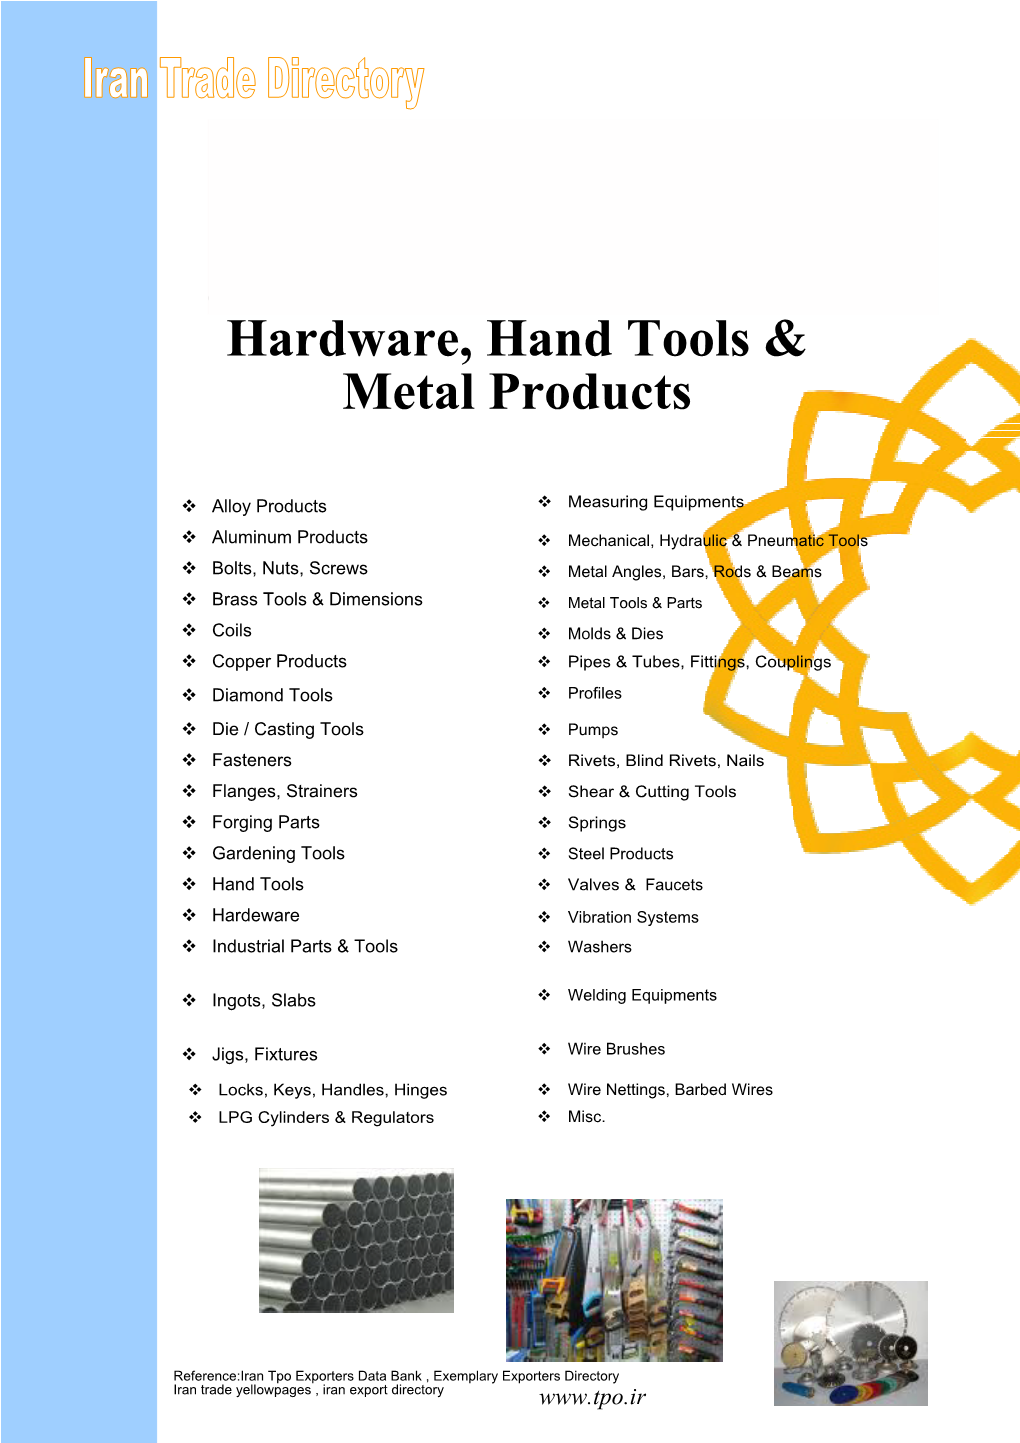 Hardware, Hand Tools & Metal Products